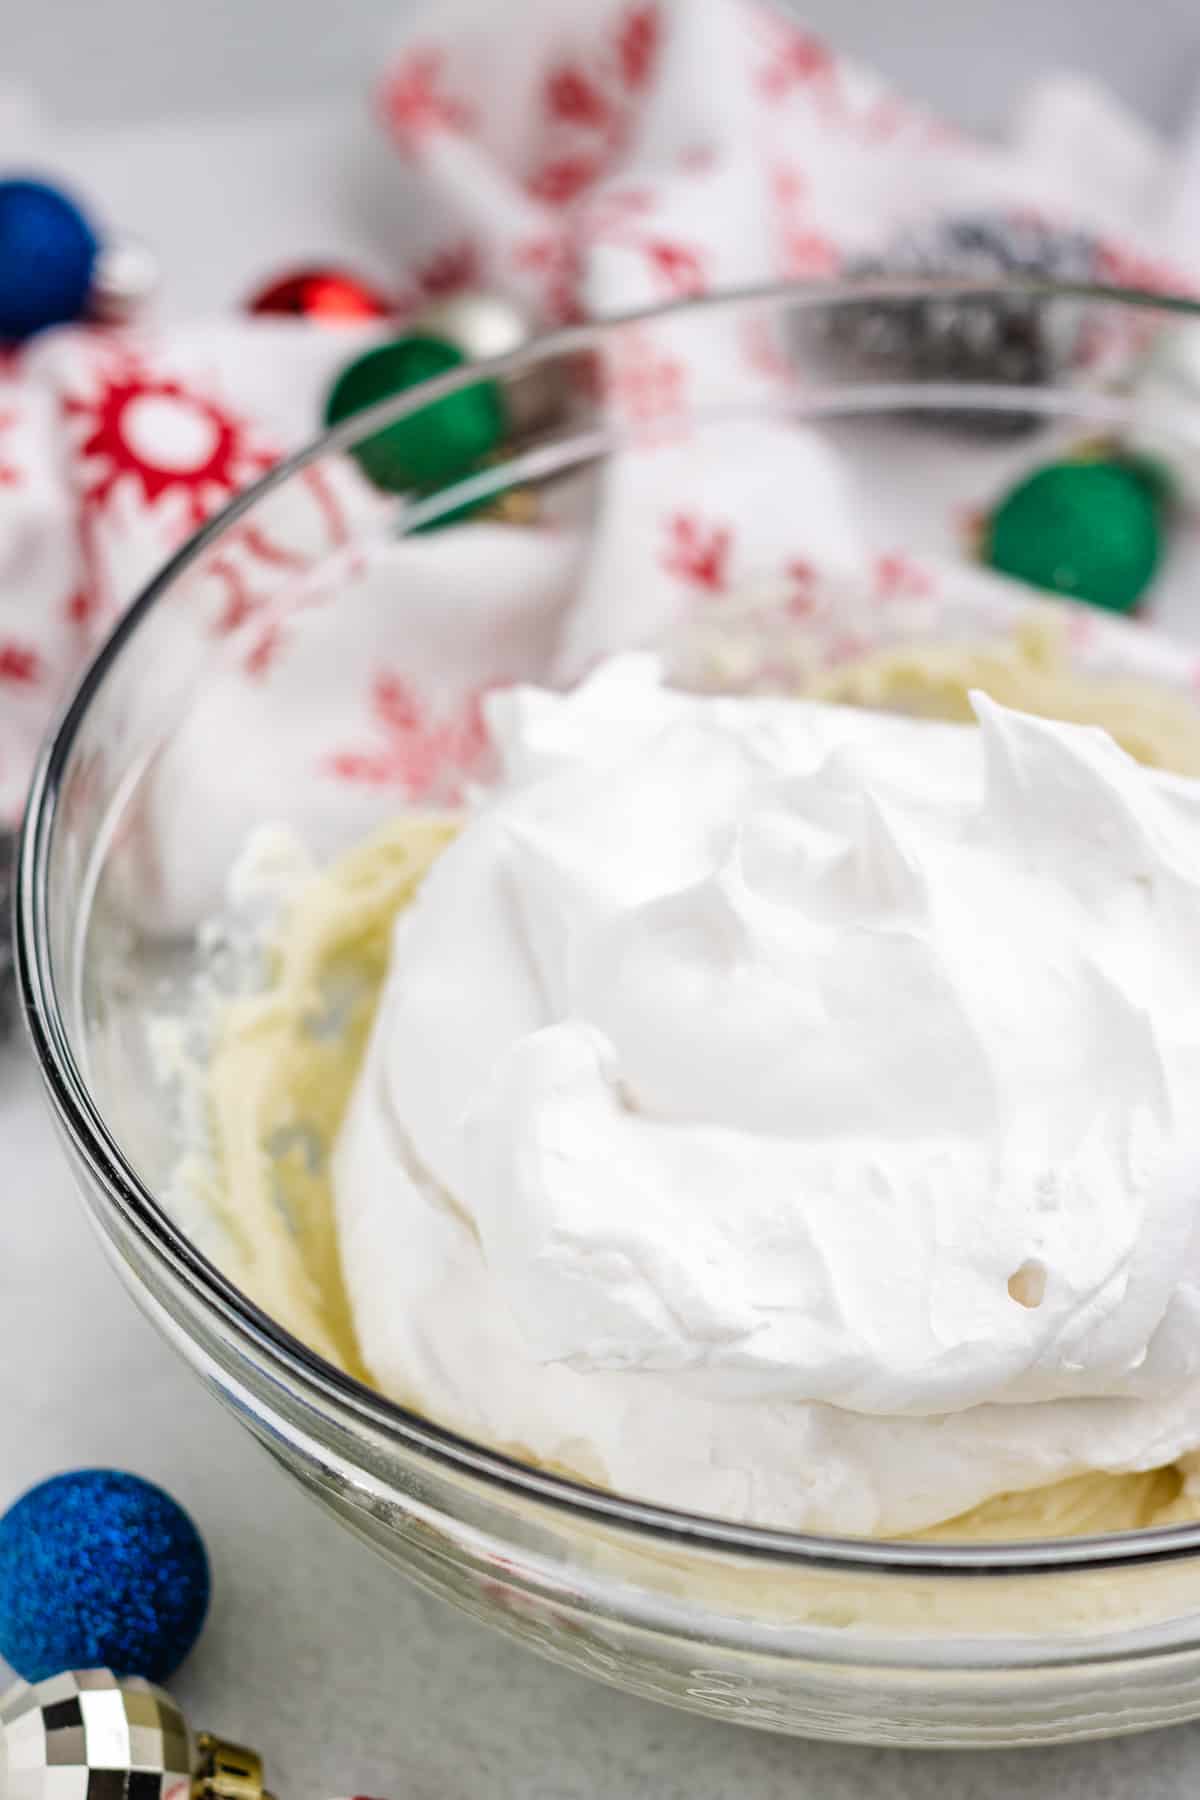 whipped topping added into the bowl that contains cream cheese and melted white chocolate.